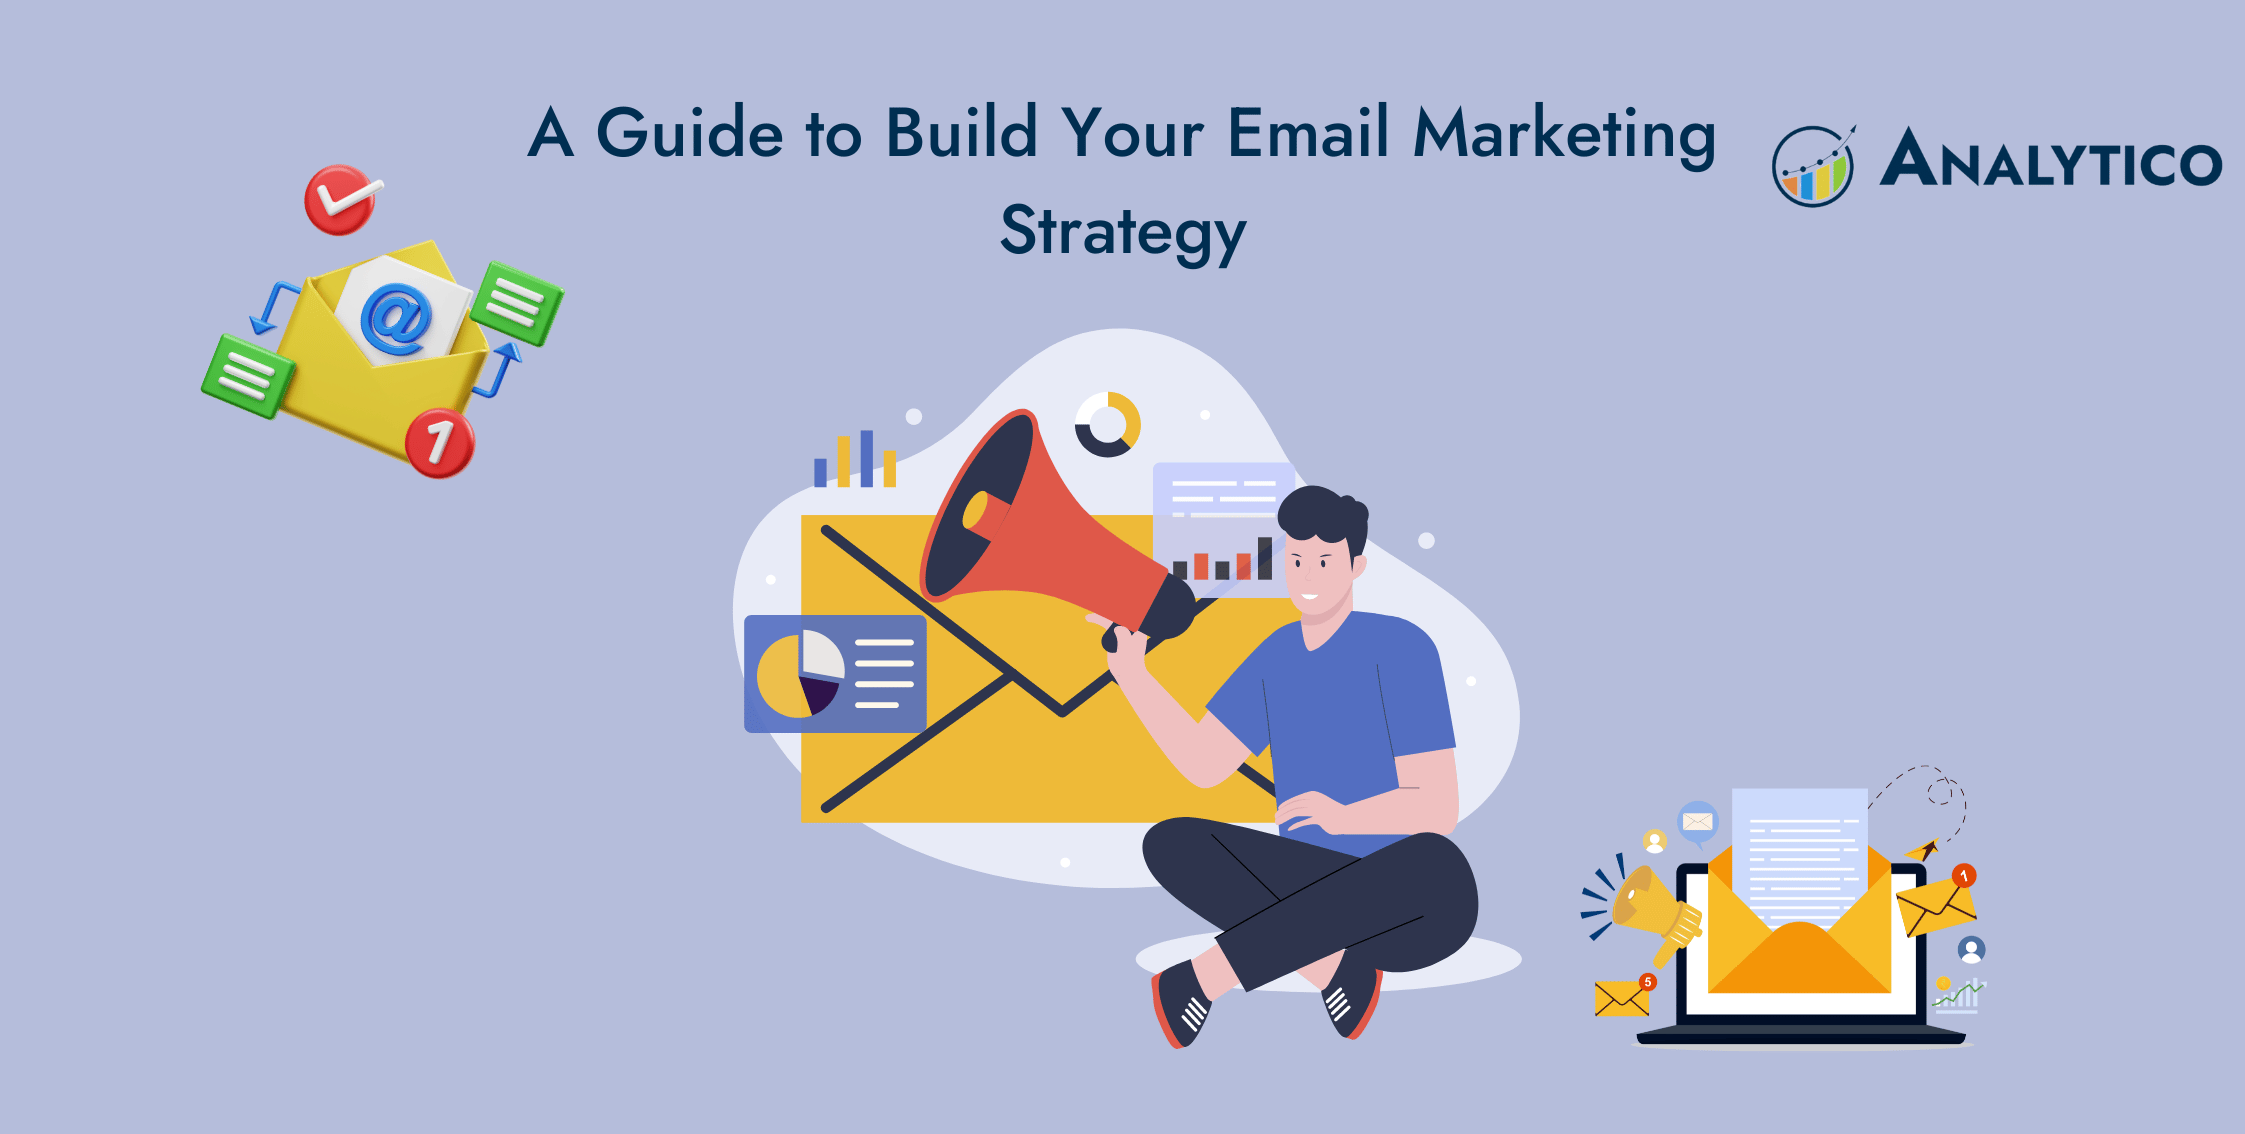 A Guide to Build Your Email Marketing Strategy